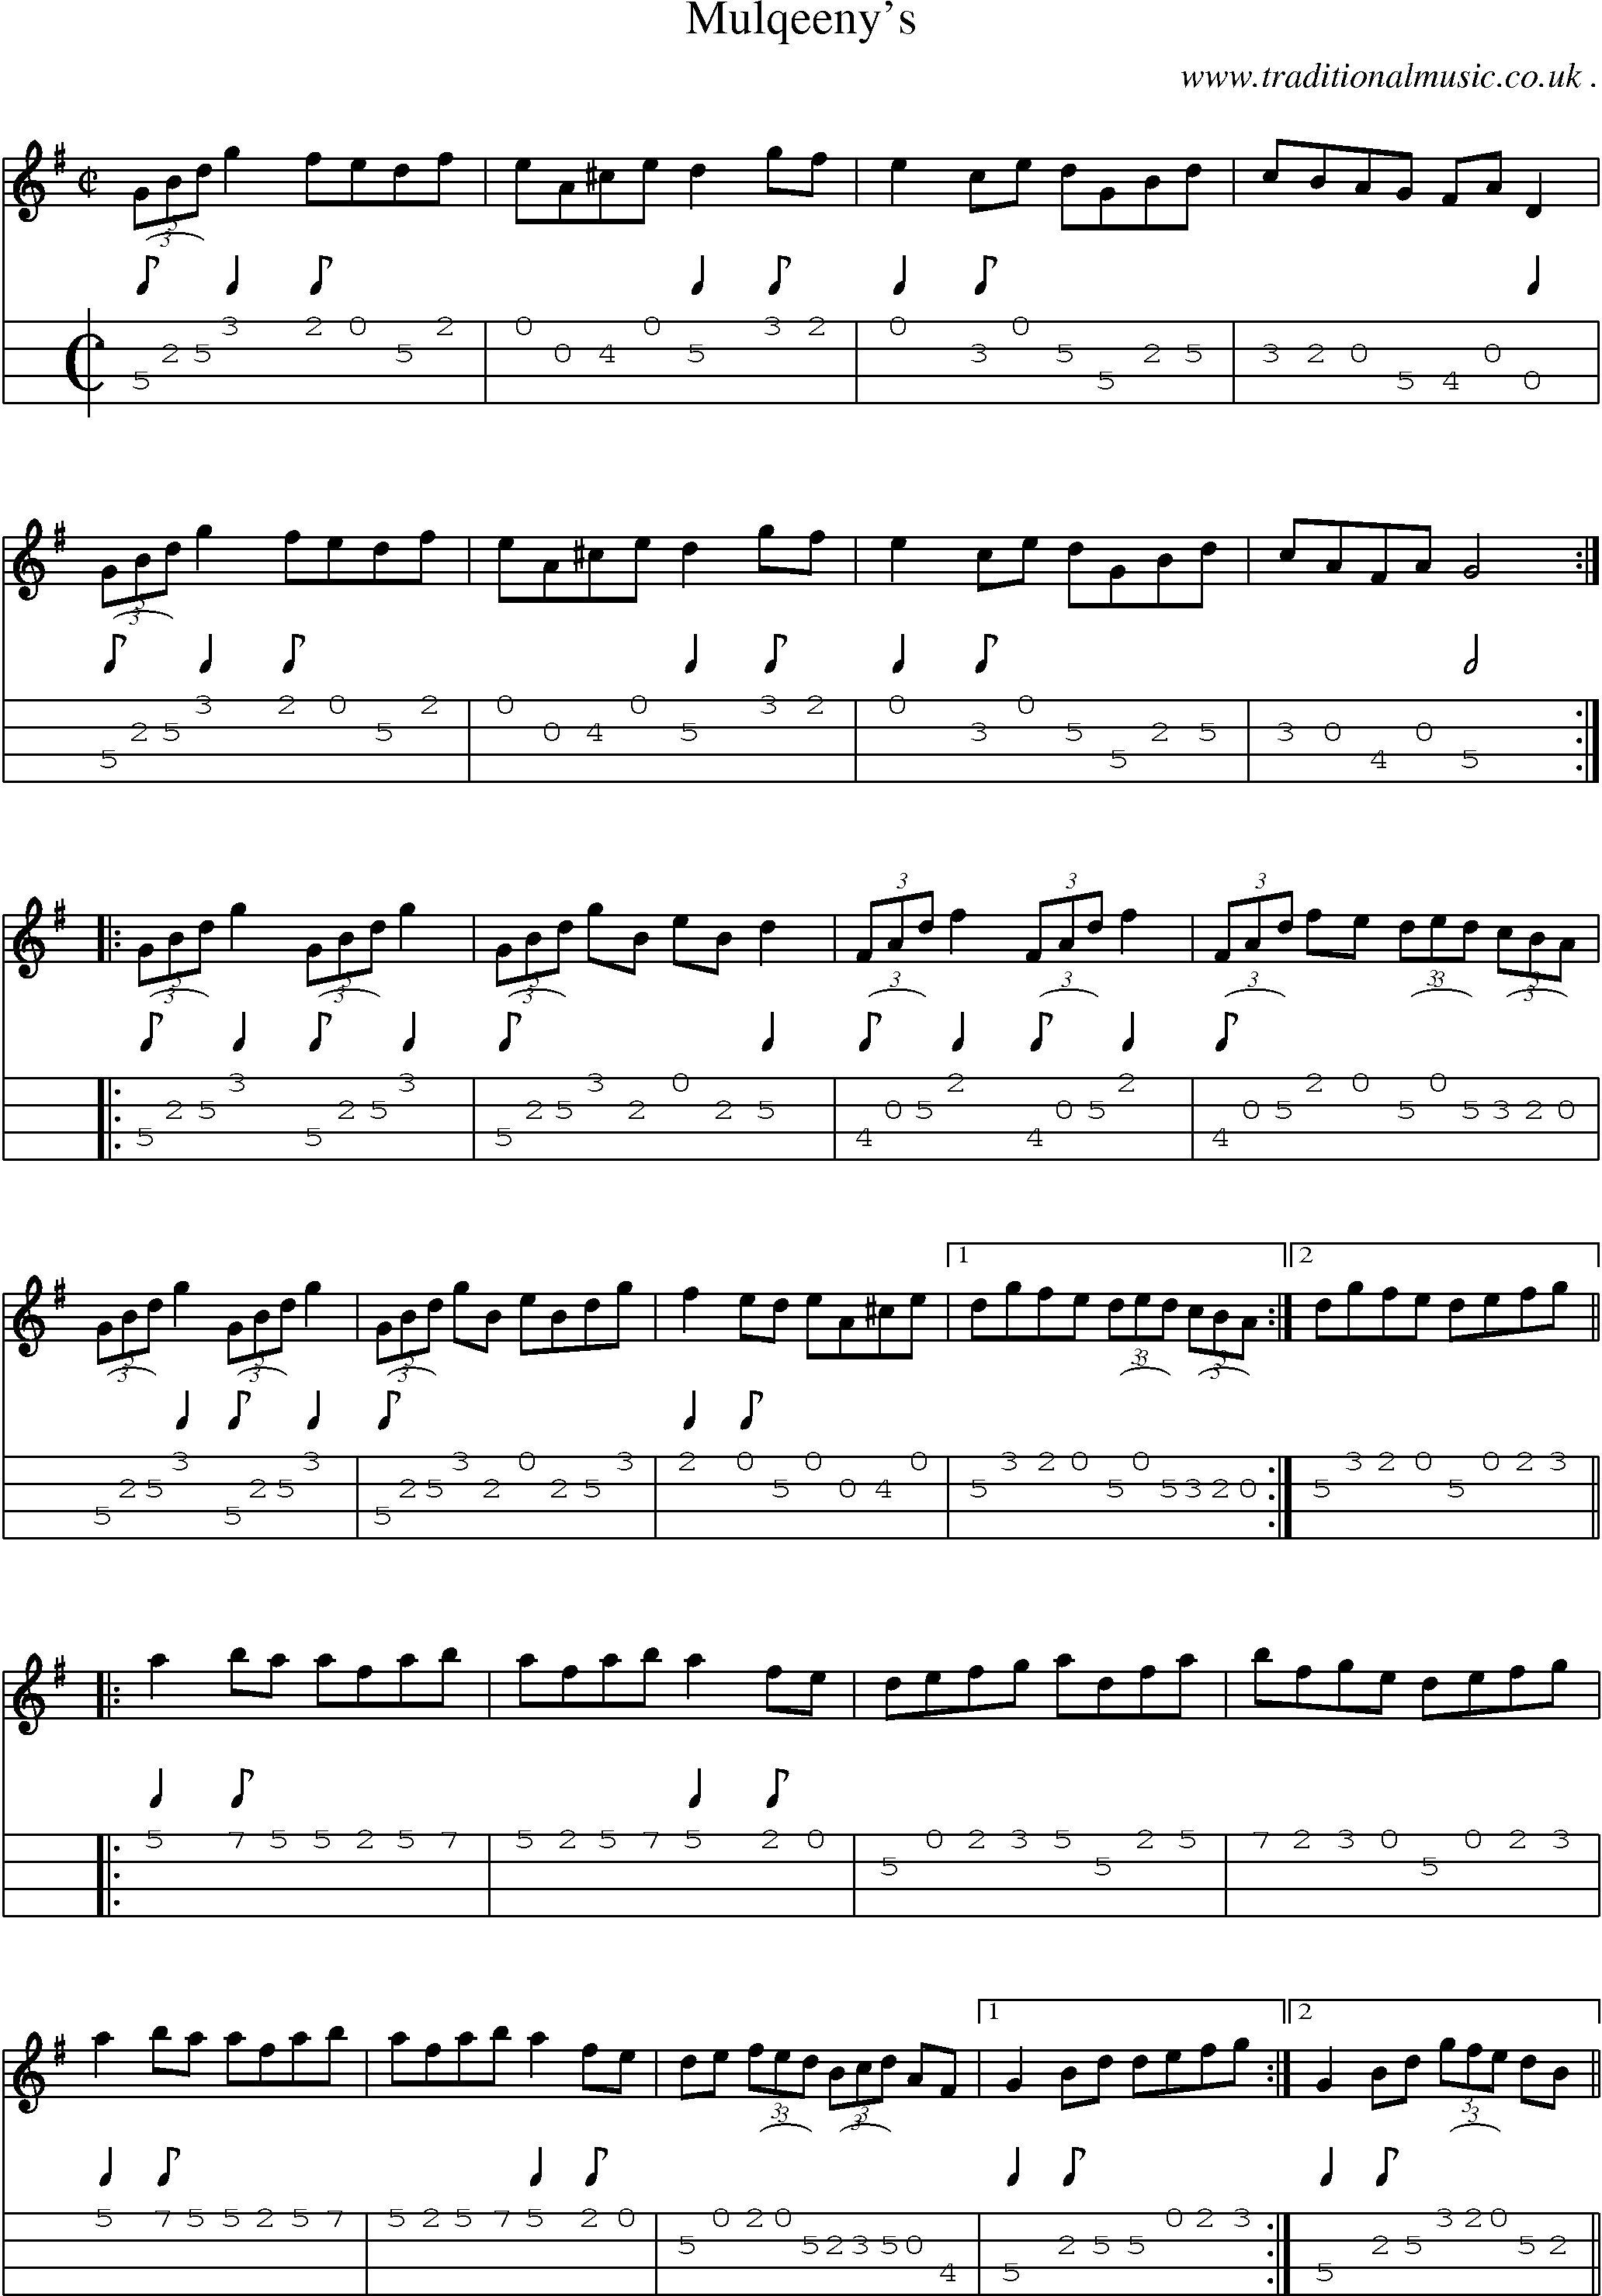 Sheet-Music and Mandolin Tabs for Mulqeenys